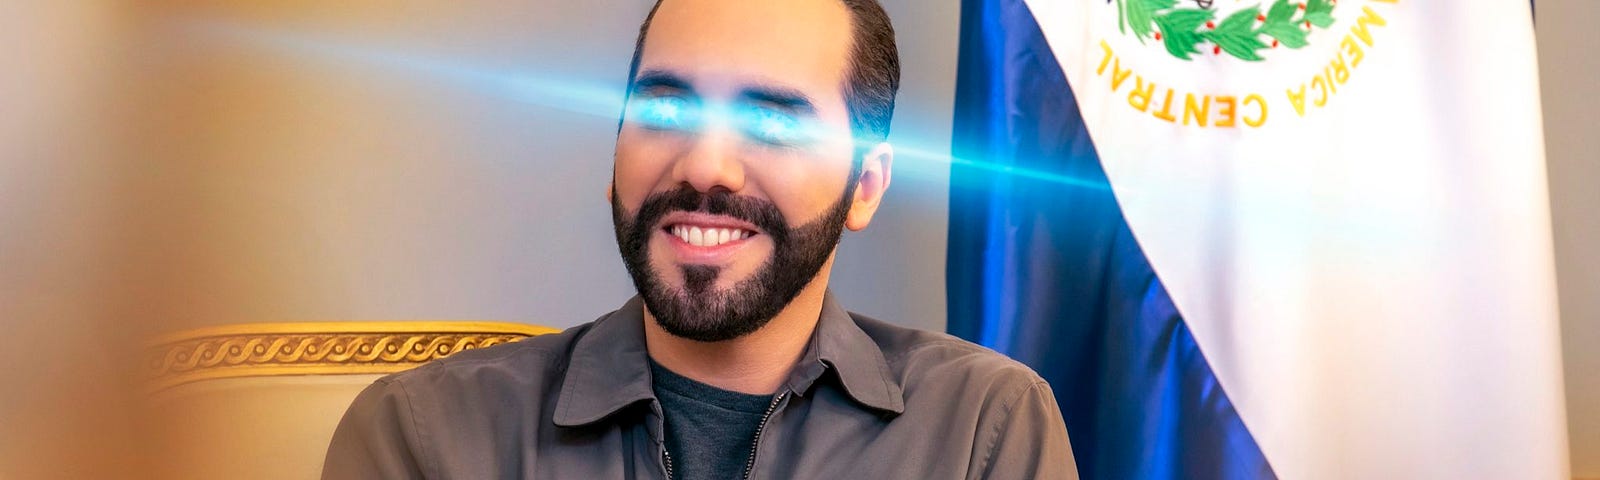 The President of El Salvador’s current Twitter profile pic. Blue lasers beam from his eyes.